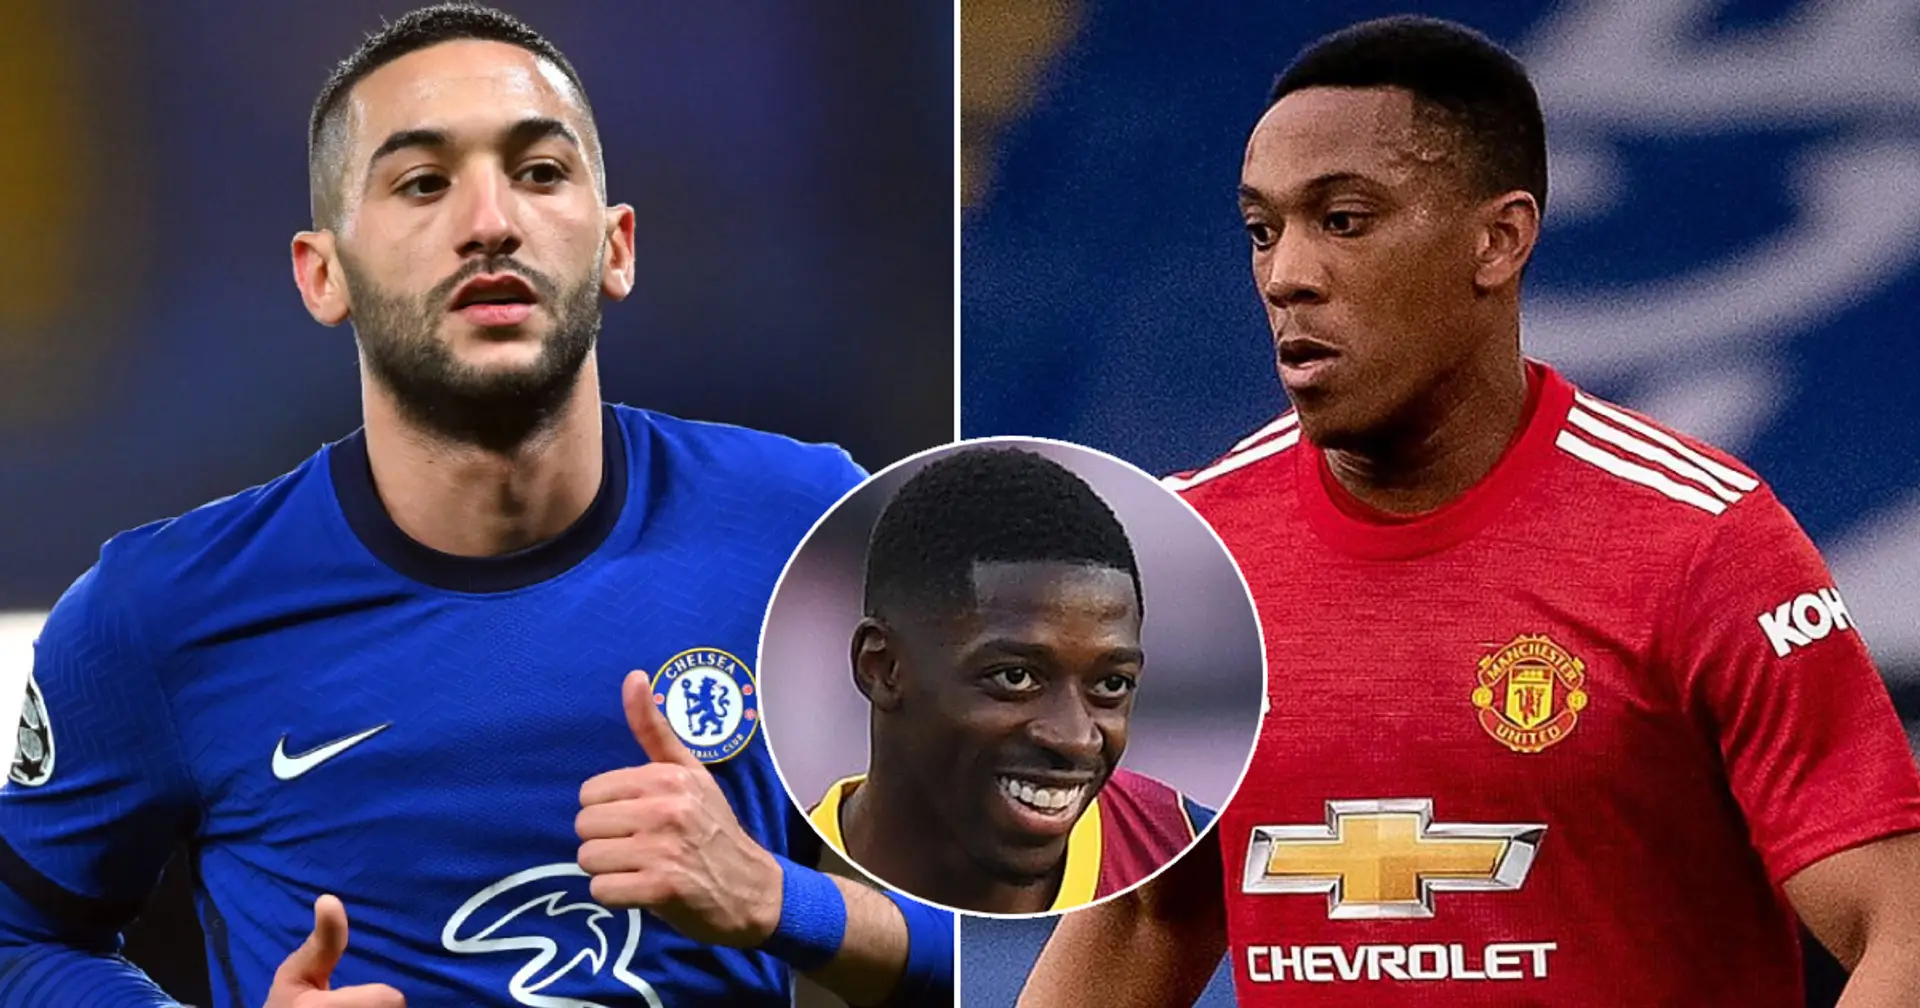 Agents of Ziyech and Martial offer their players to Barca following Dembele snub (reliability: 5 stars)